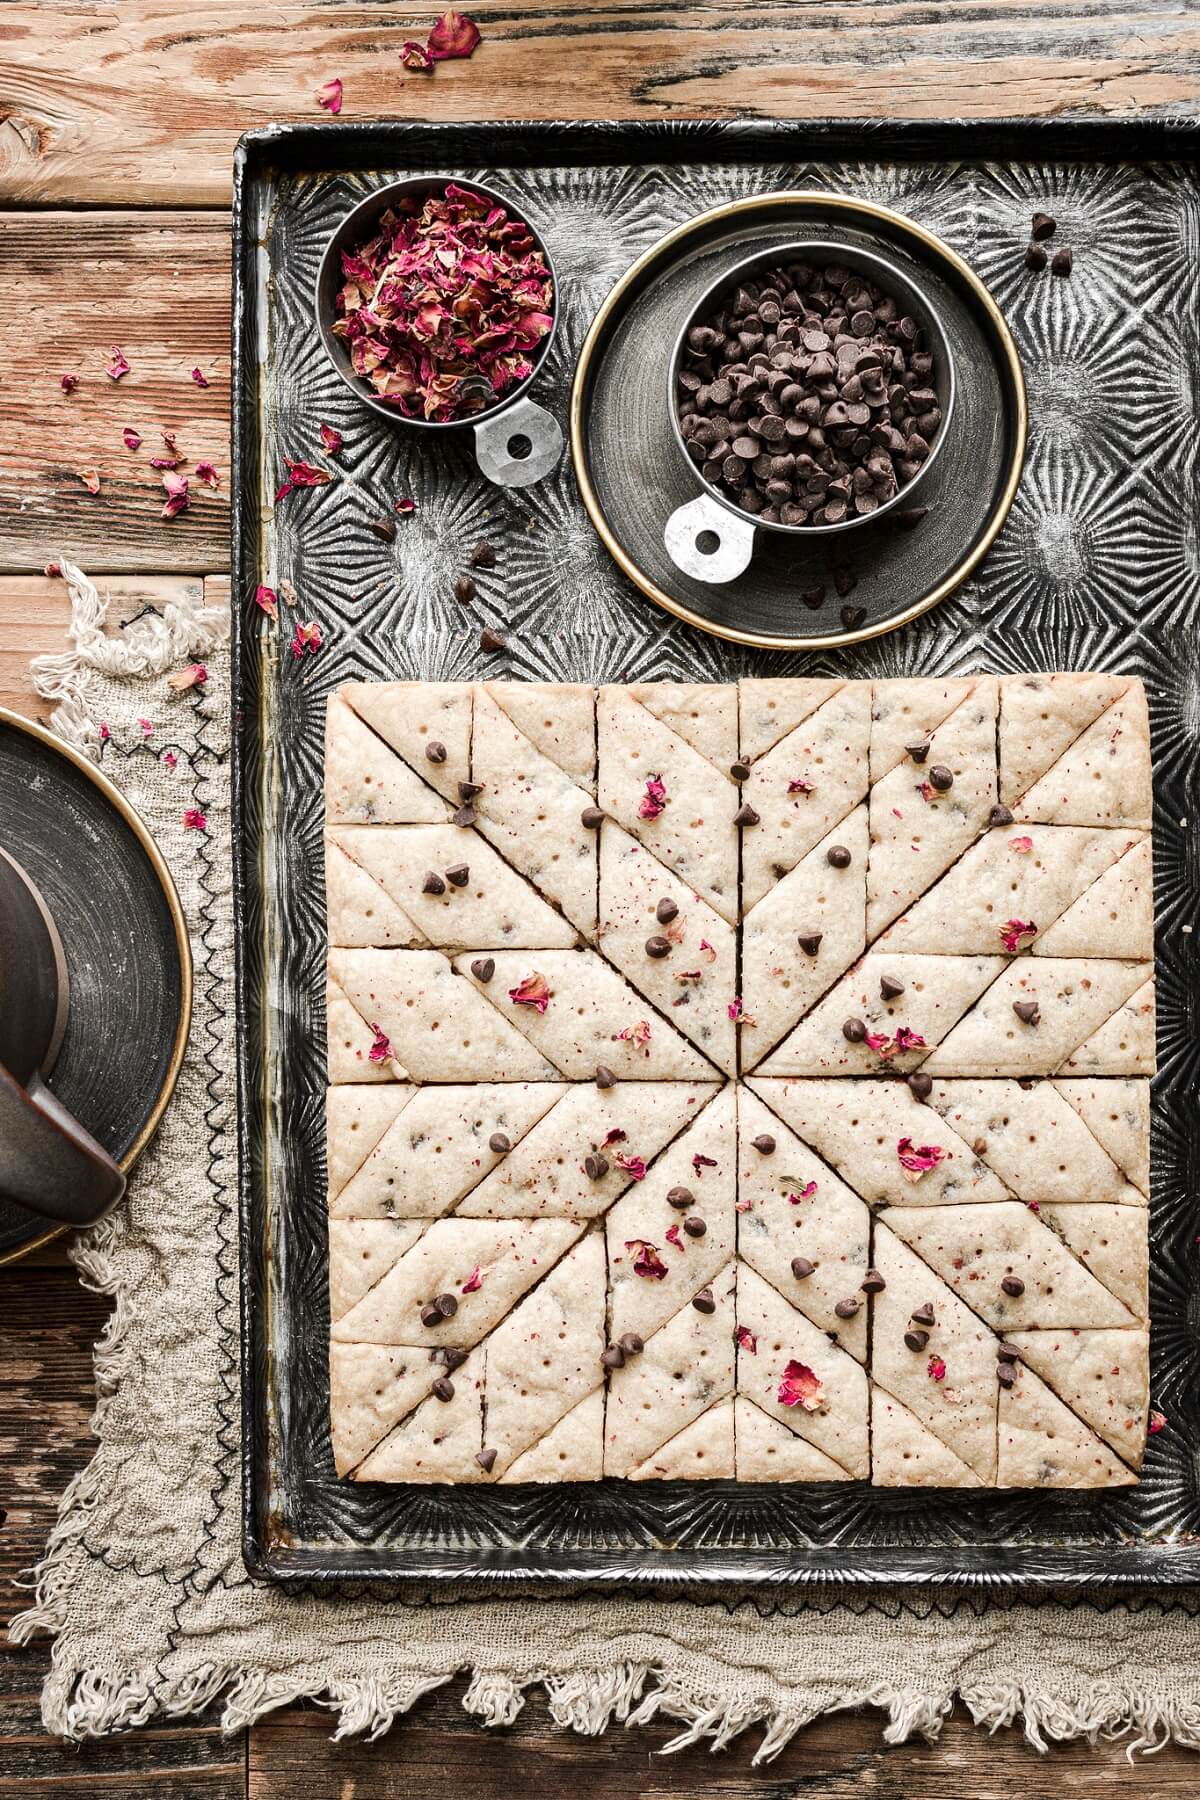 Chocolate chip shortbread decorated with chocolate chips and edible rose petals.